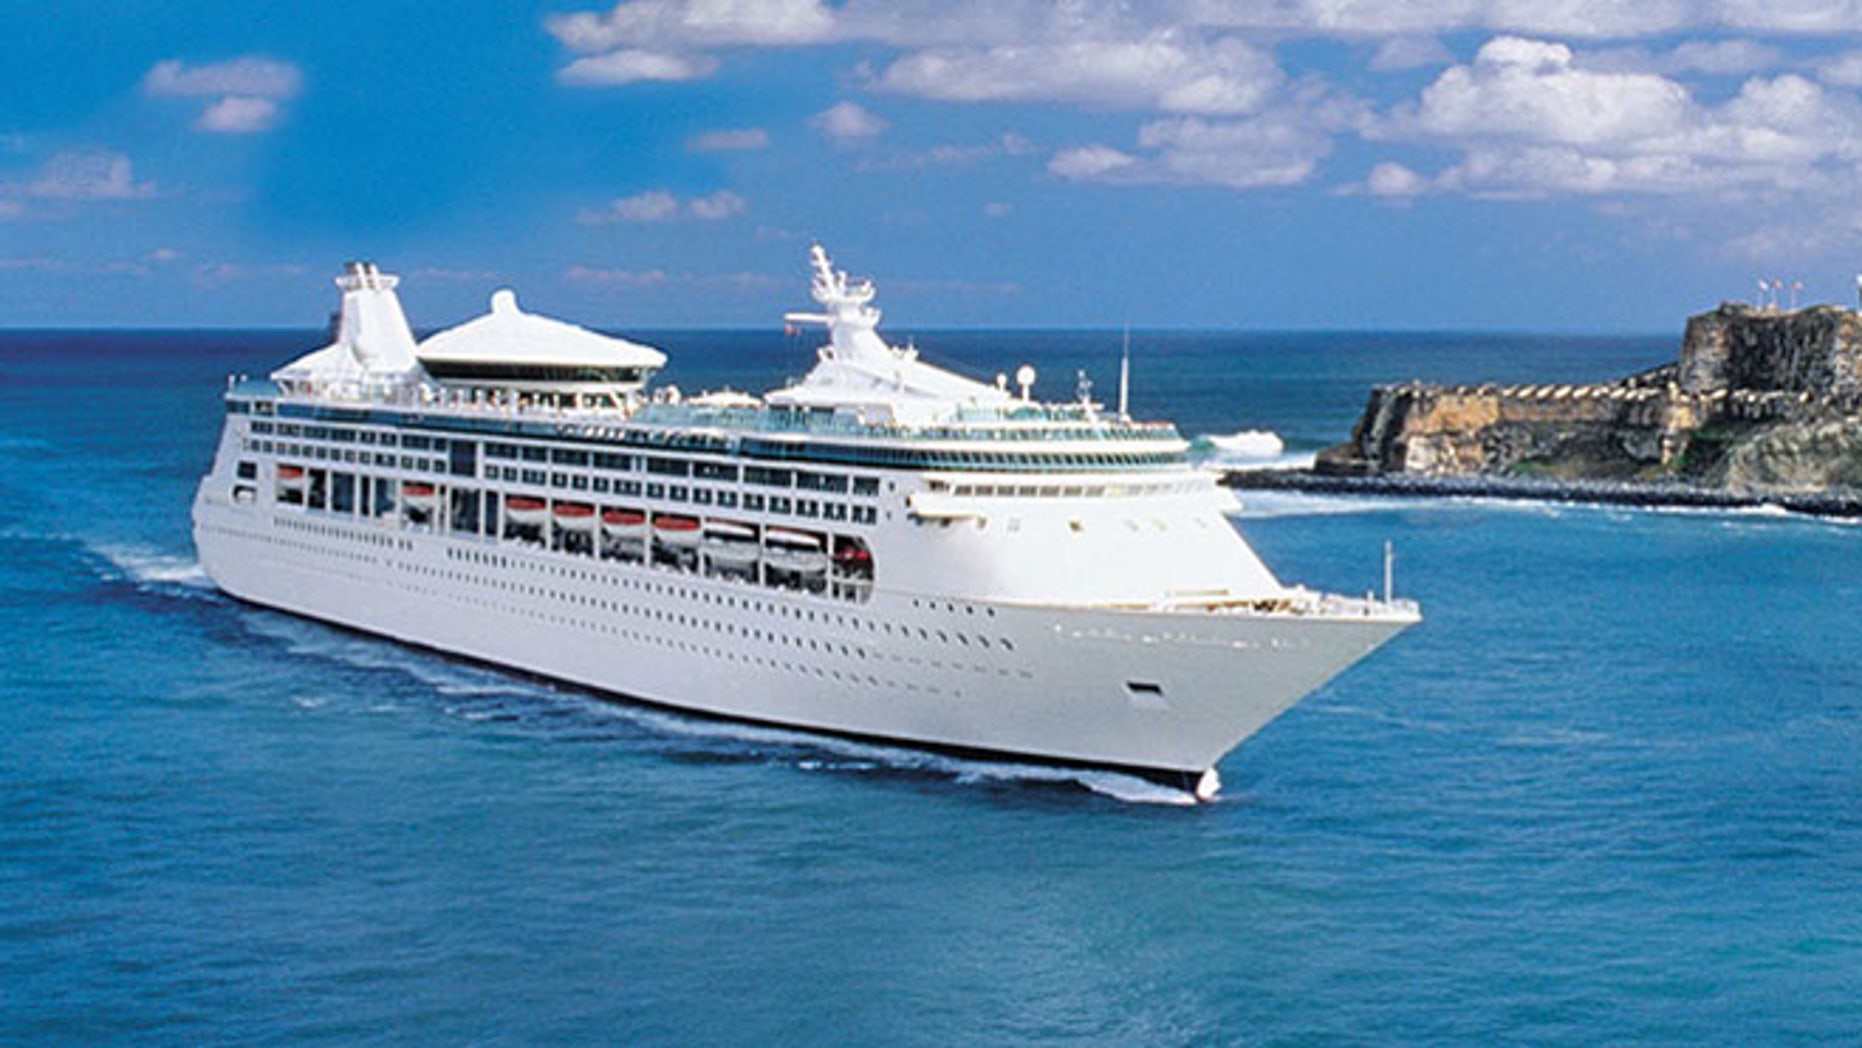 Autismfriendly travel now officially aboard Royal Caribbean cruises